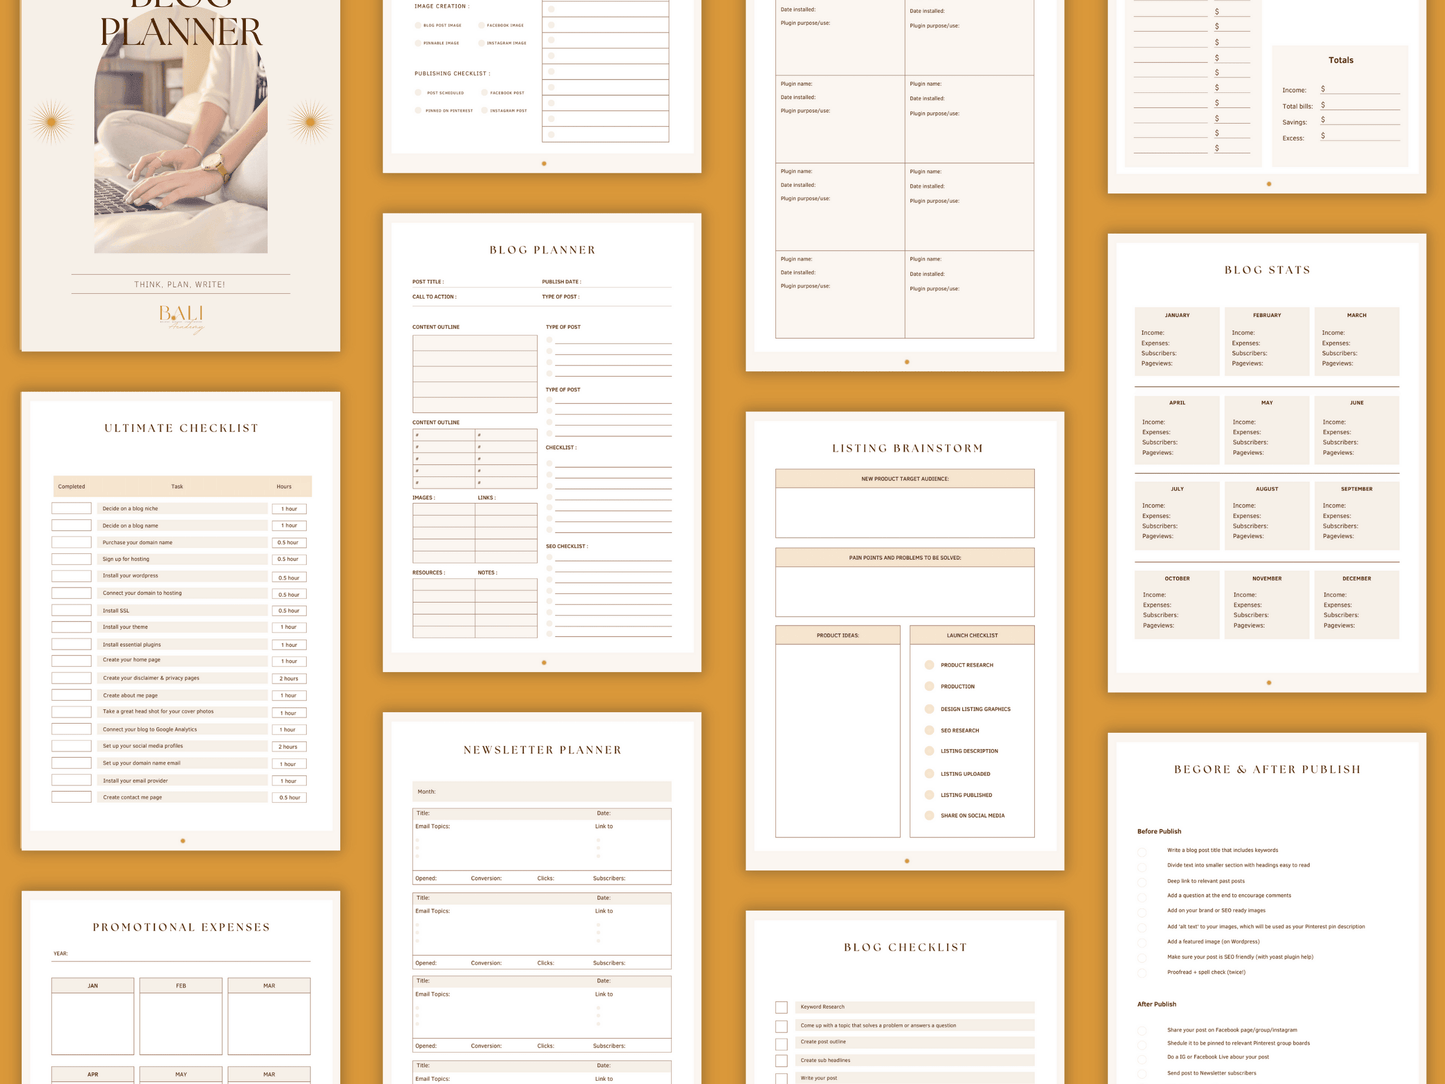 Aesthetic and boho blog content done-for-you planner templates which include e.g. blog stats, blog checklist, promotional expenses, etc. for content creators and business owners. It's editable in Canva.